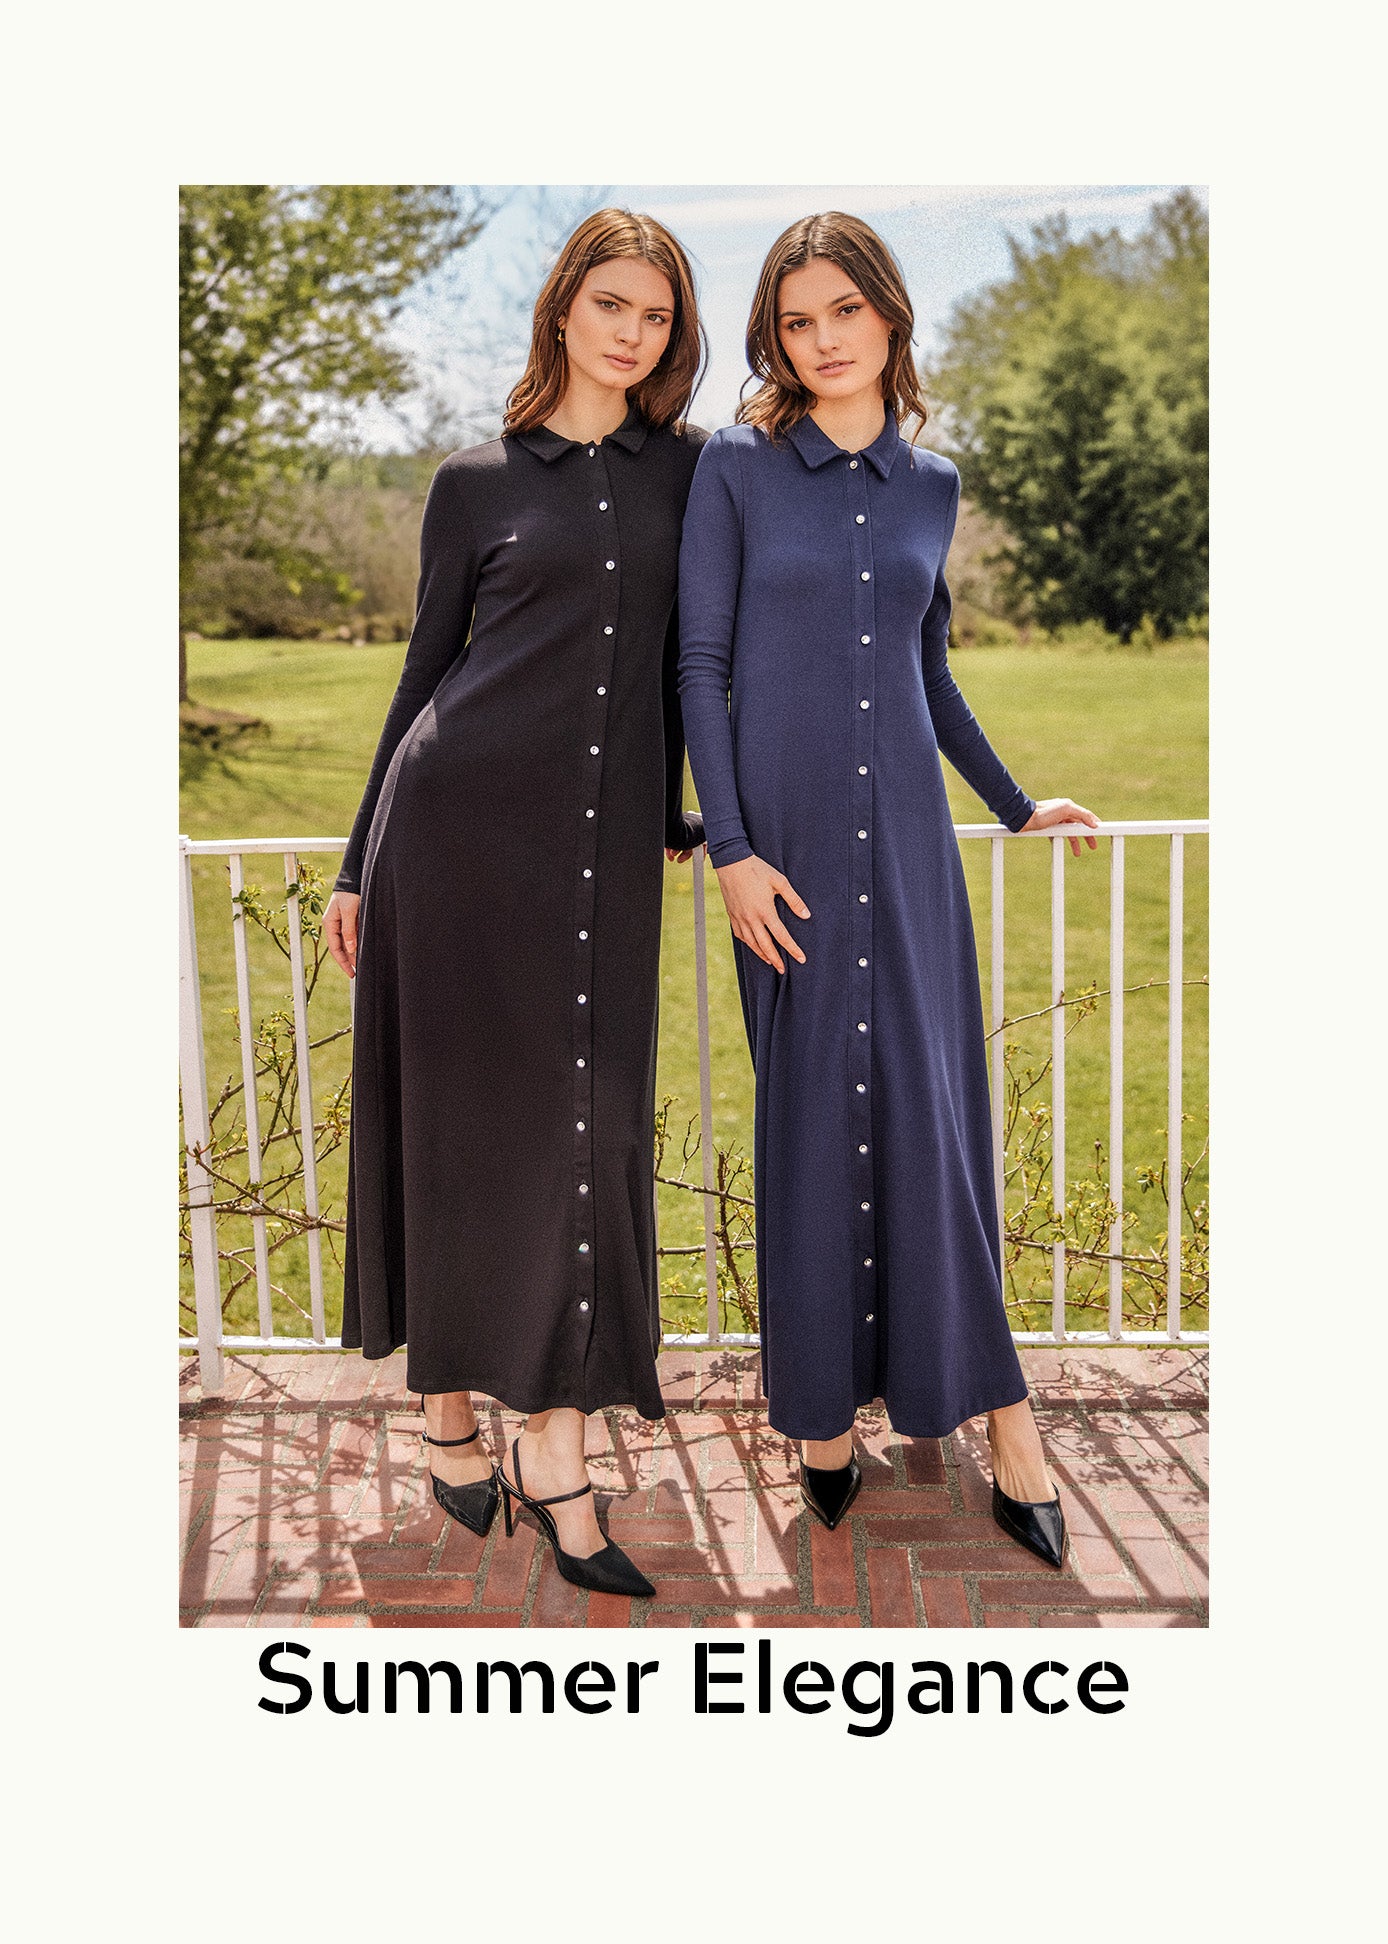 Two young women wearing maxi dresses, one in black, one in navy. The dresses button down the front.